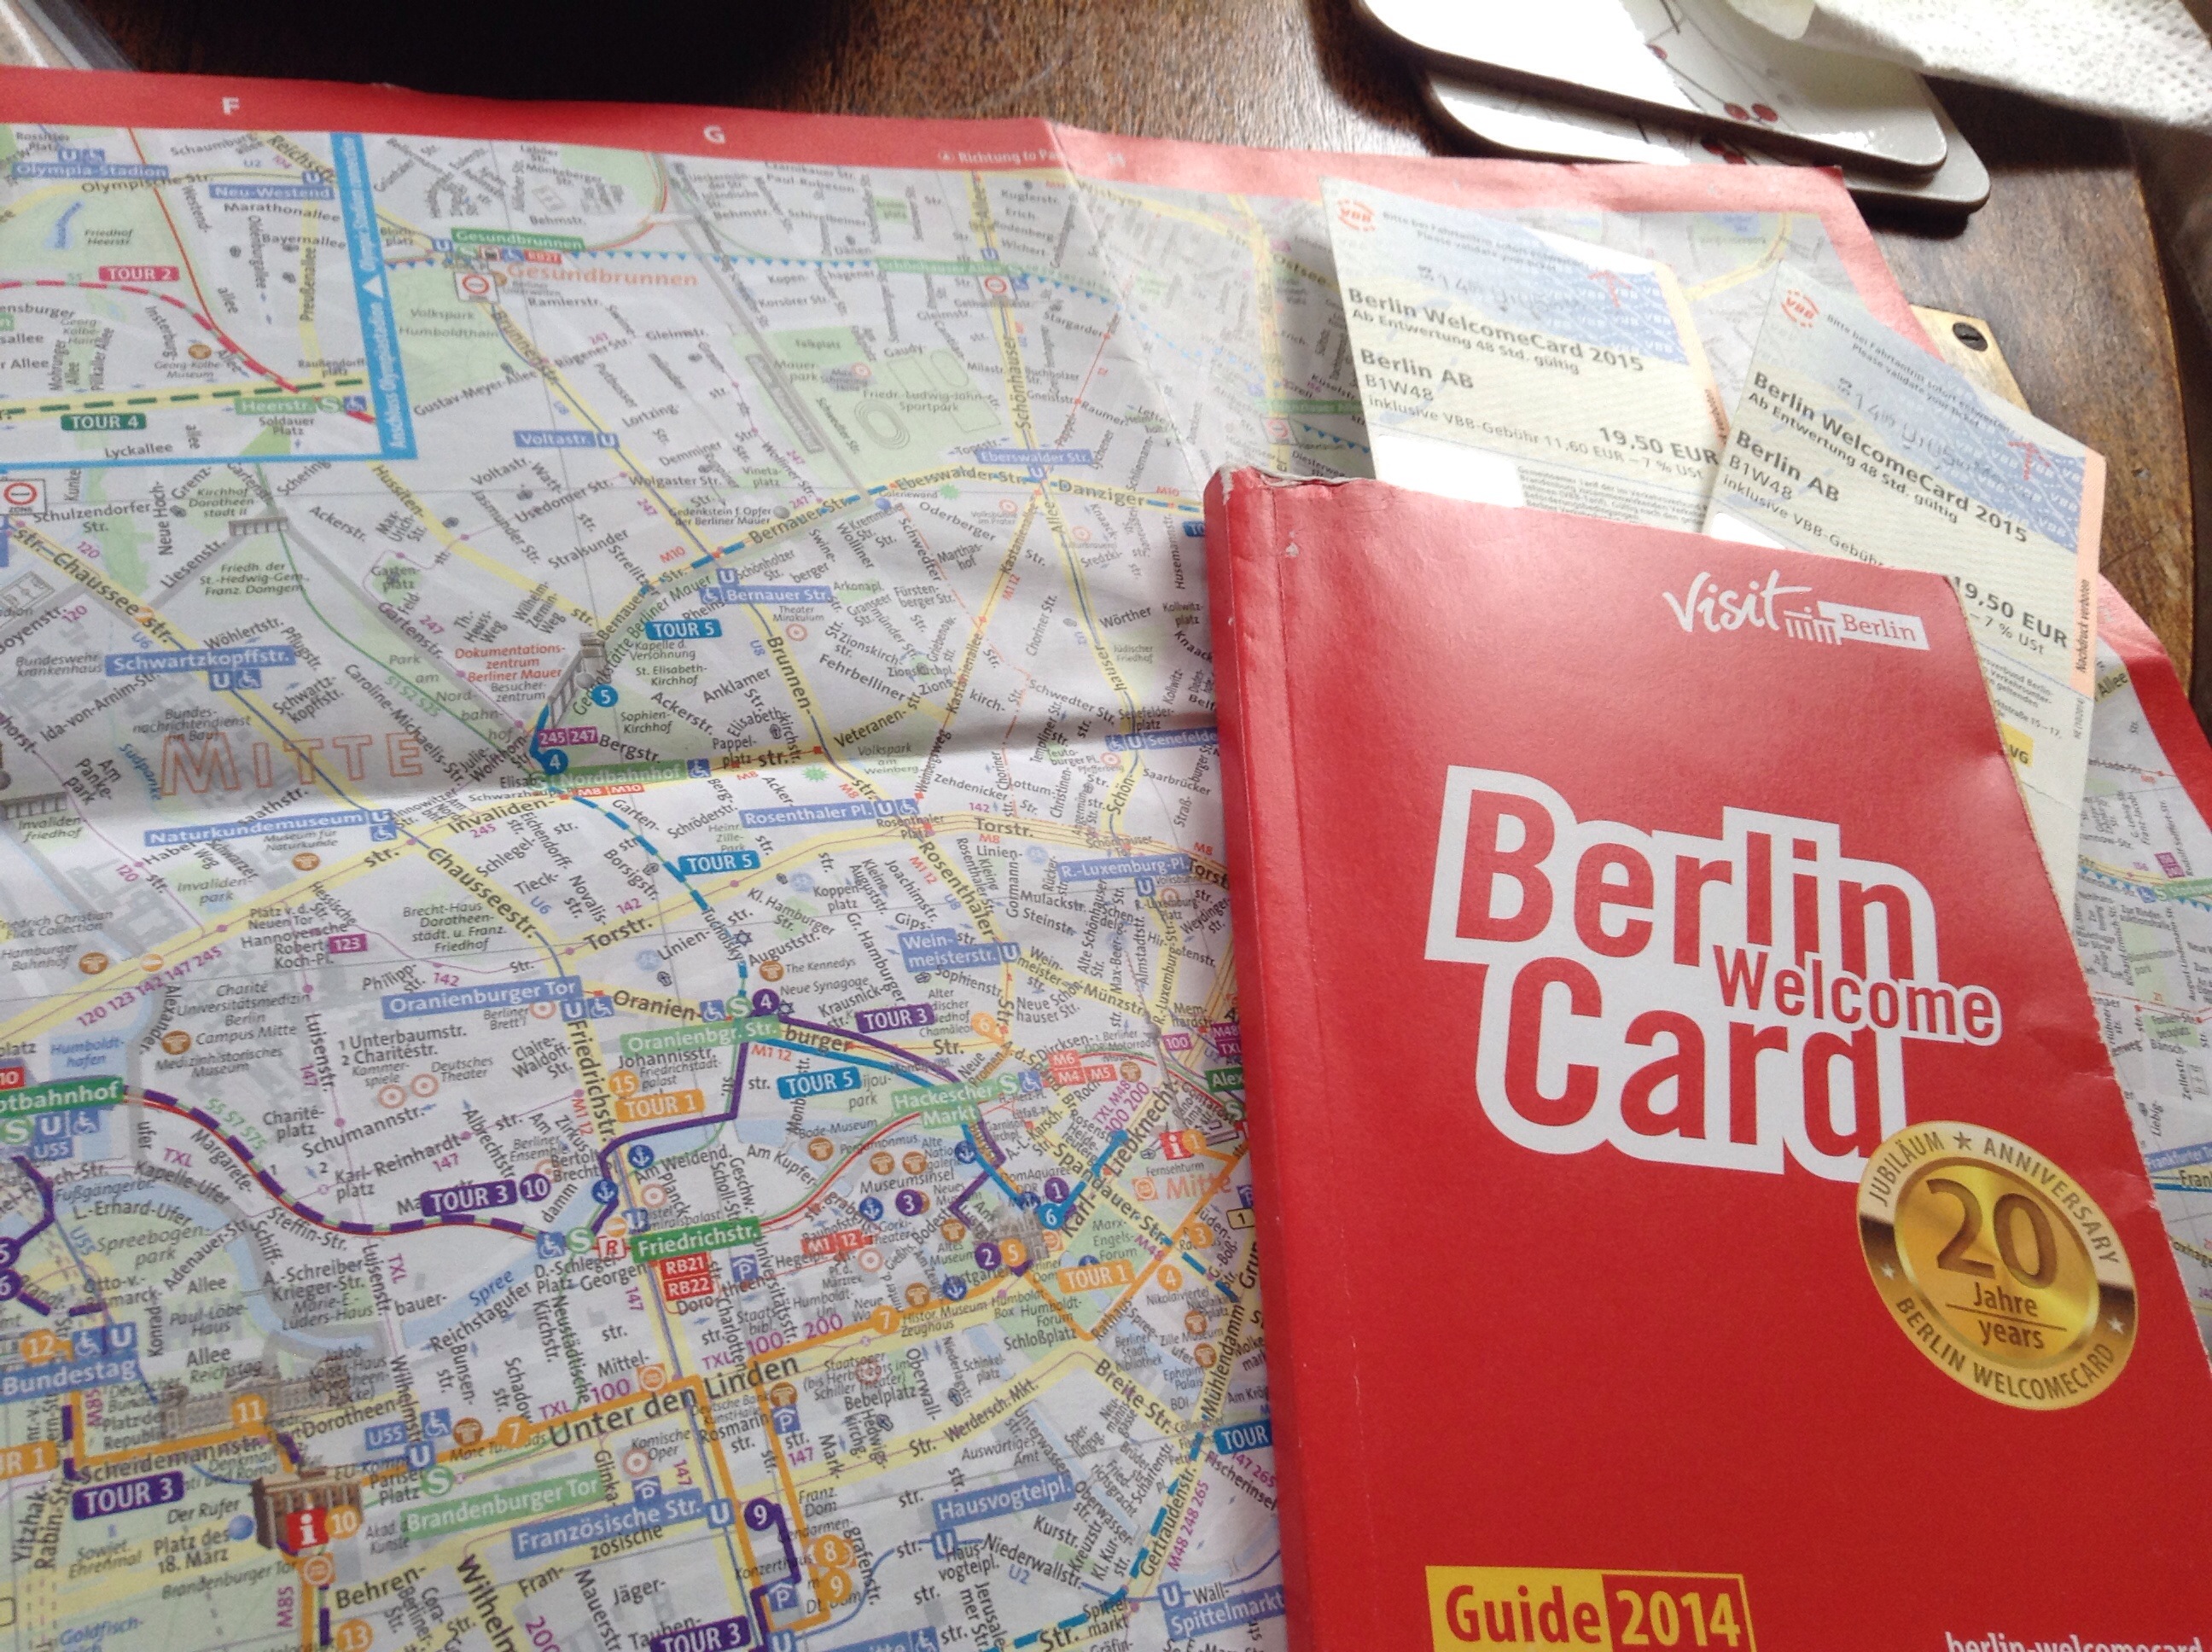 FotoFolio: Welcome Berlin Card and the Tour Map